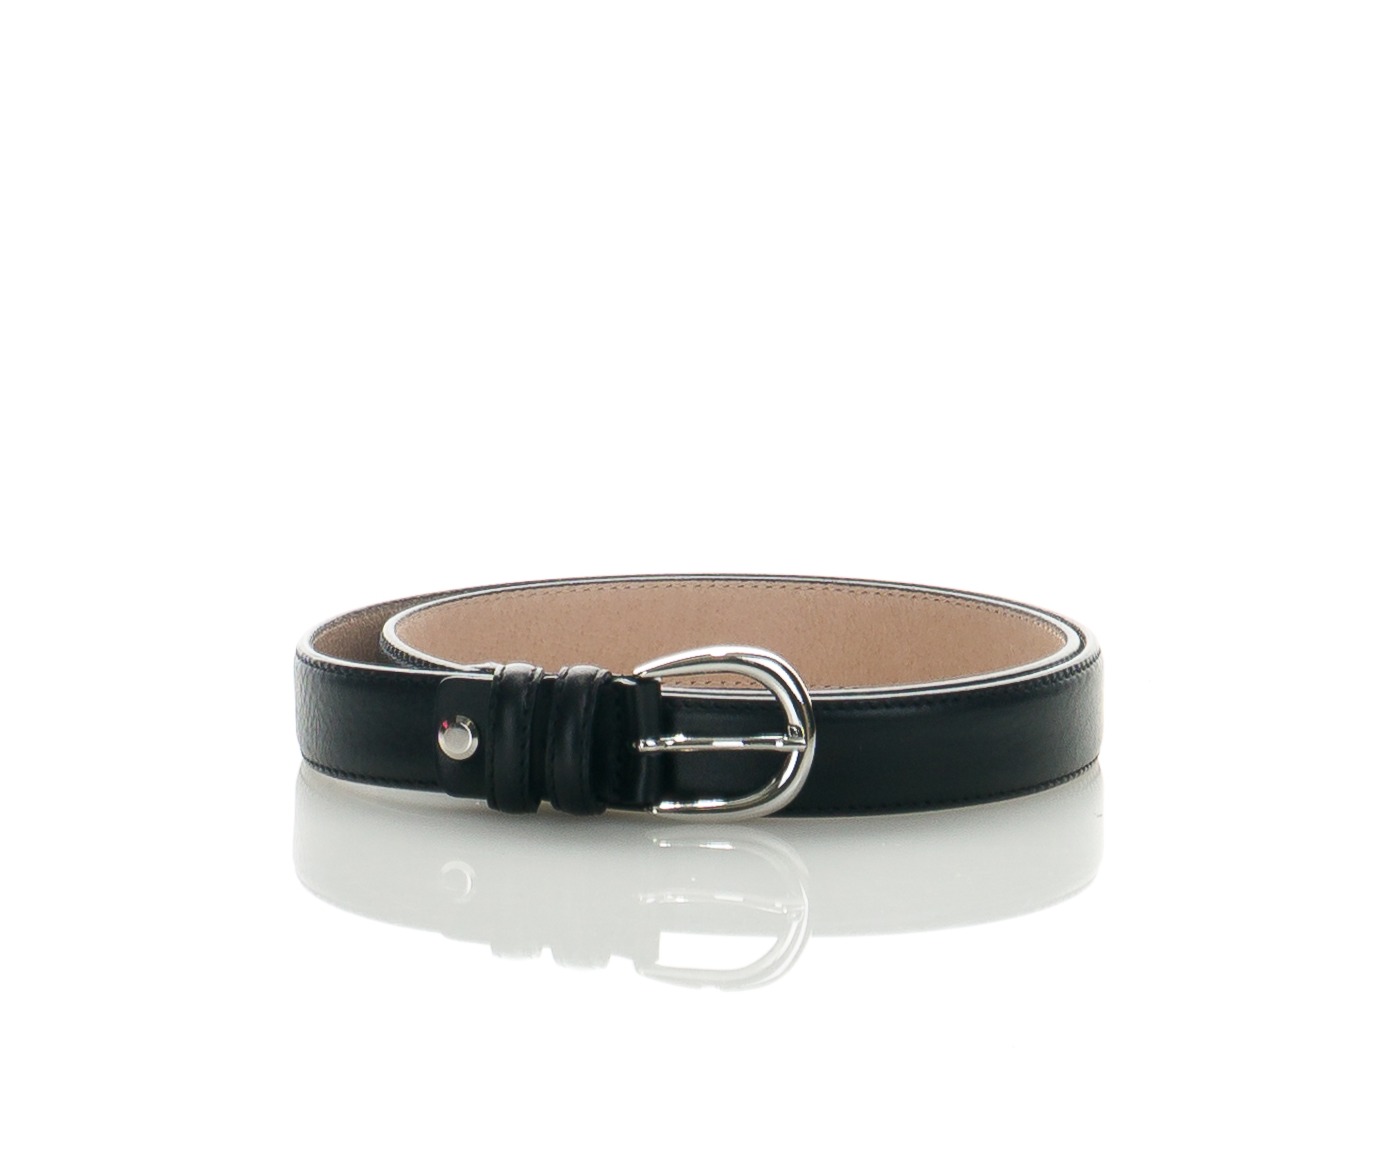 Woman Genine Leather Belt with Metal Finish. Made in Italy - Black